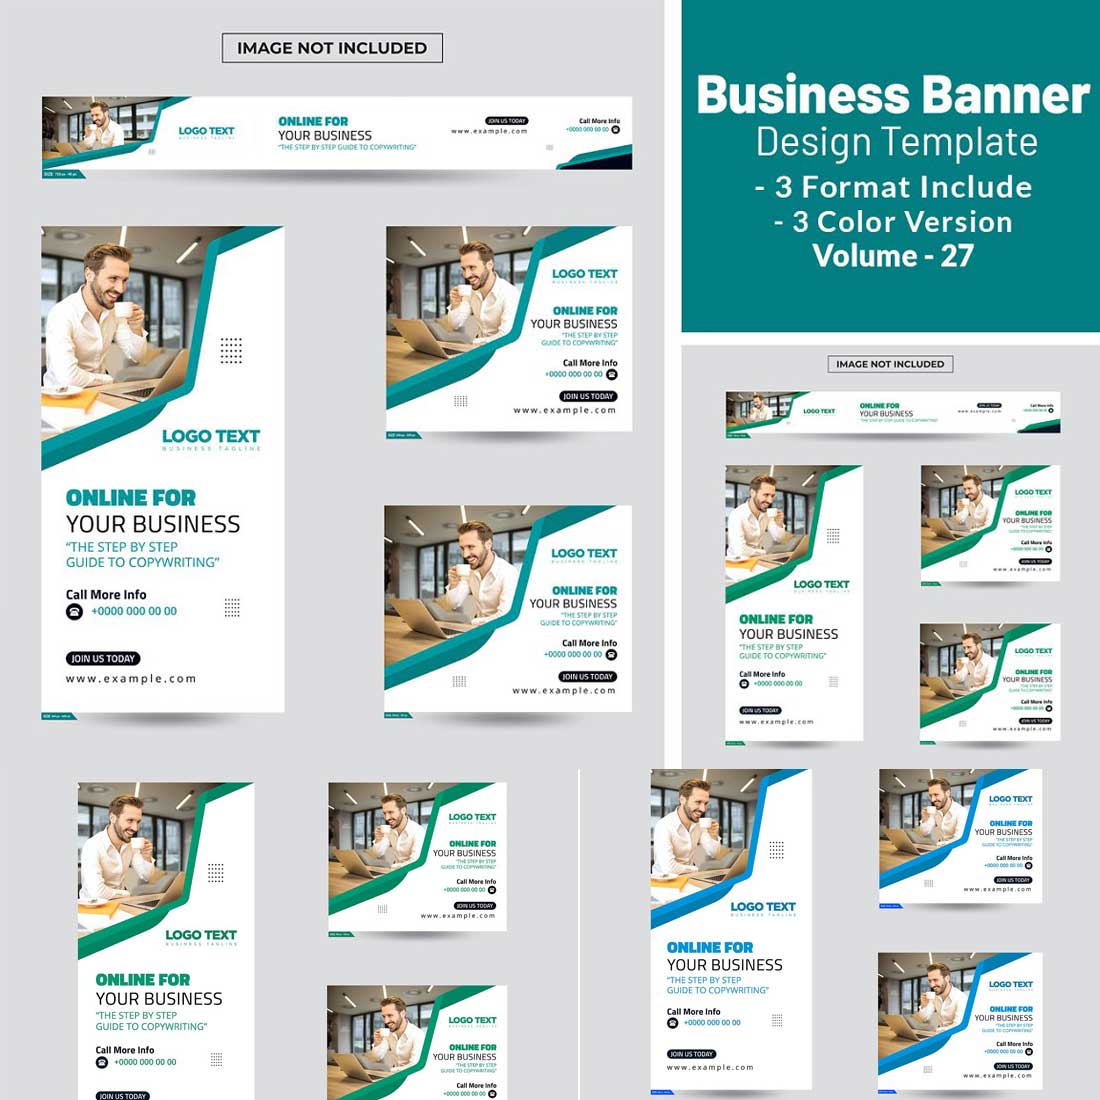 Business Banner Design Template cover image.